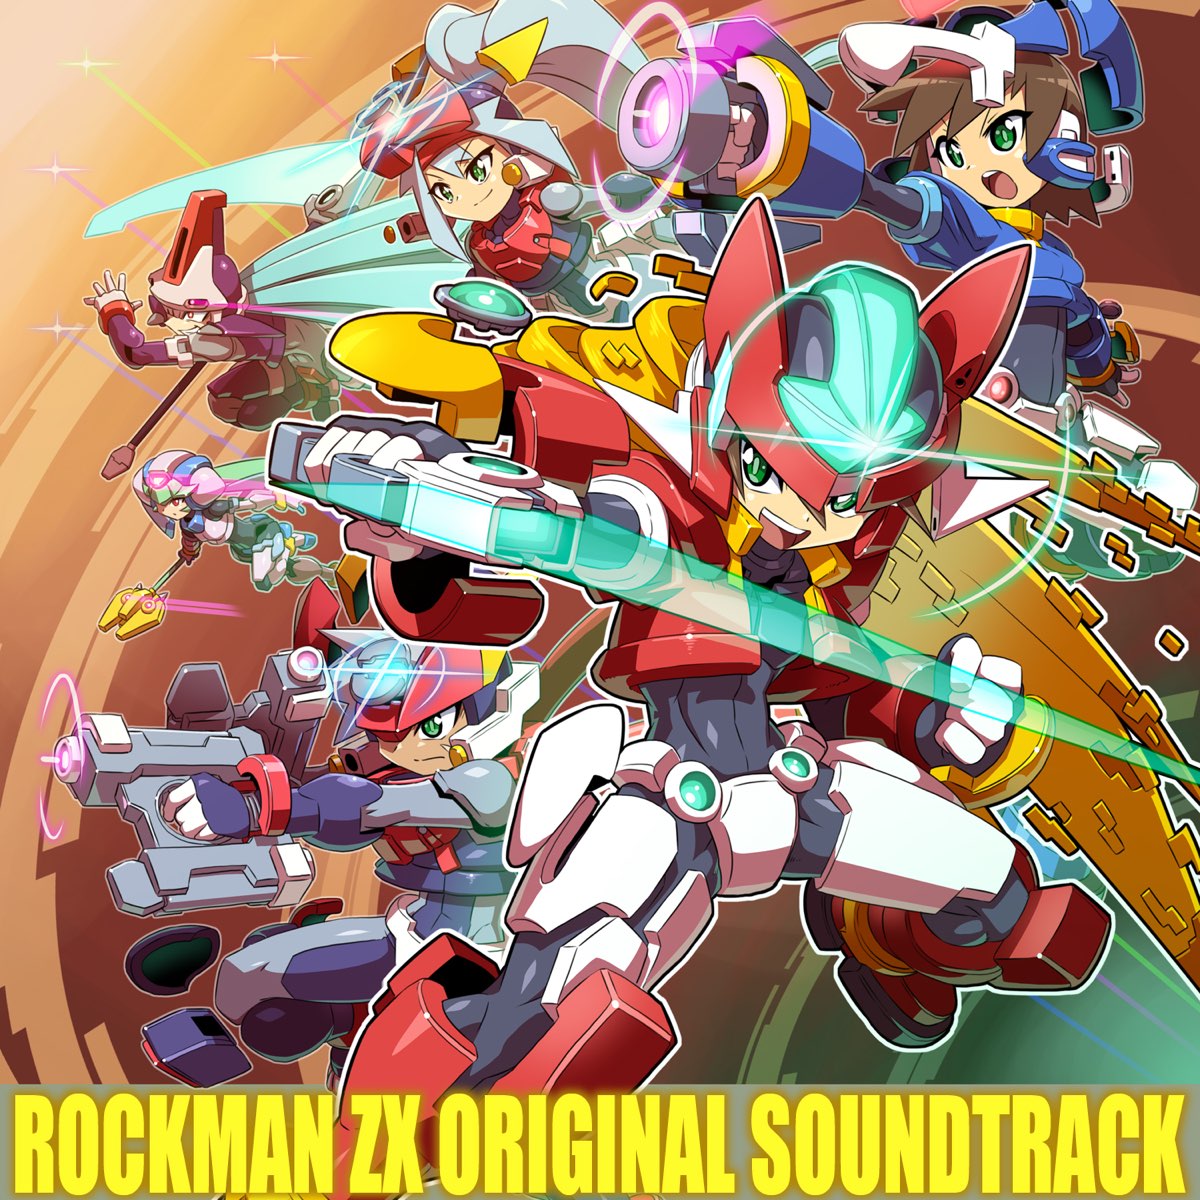 MEGAMAN ZX ORIGINAL SOUNDTRACK by カプコン・サウンドチーム on 